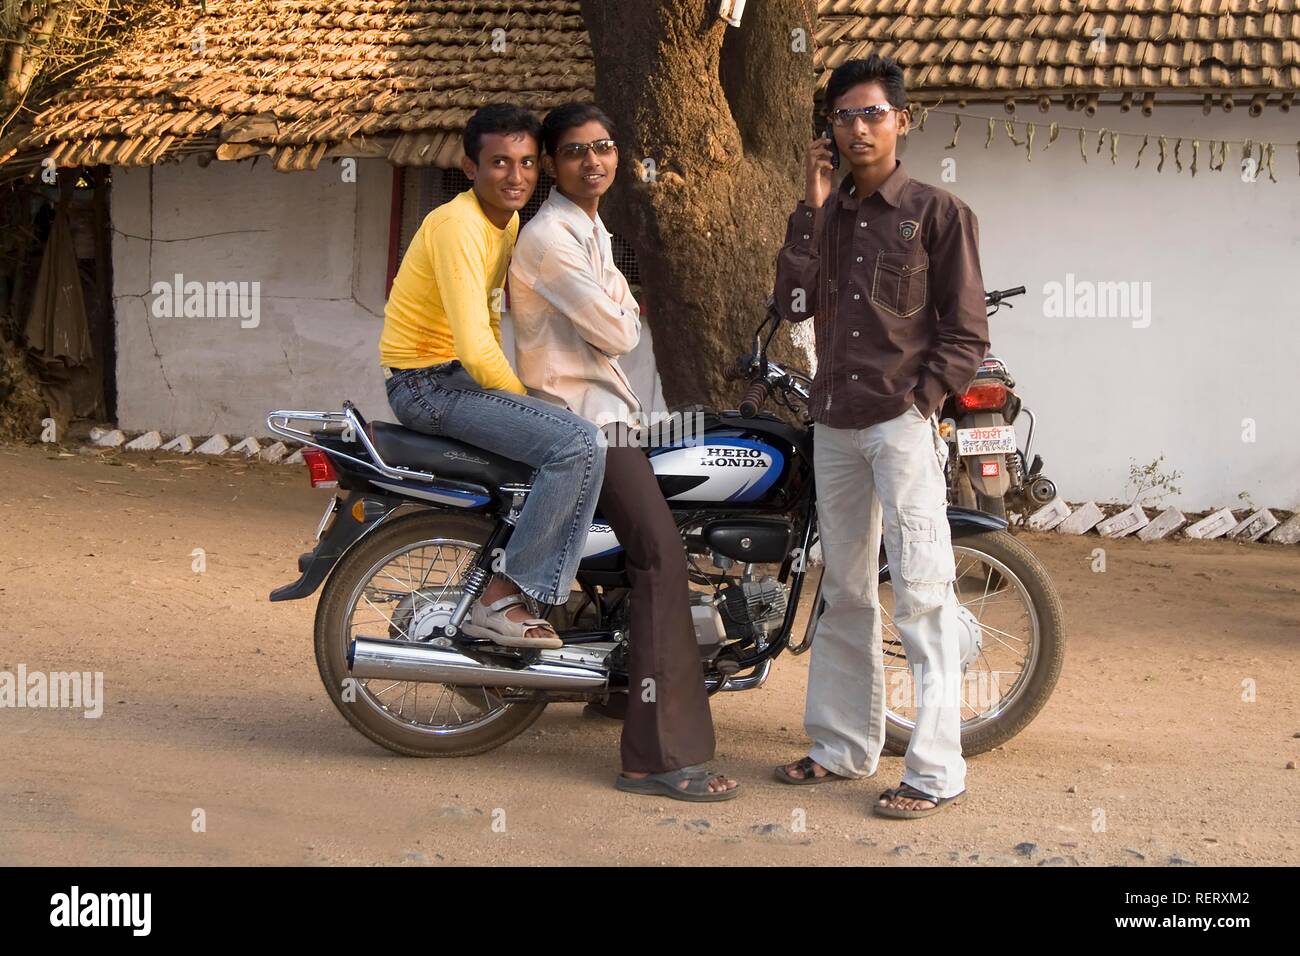 Street scene, young men on a motorcycle, Madhya Pradesh, India, South Asia Stock Photo